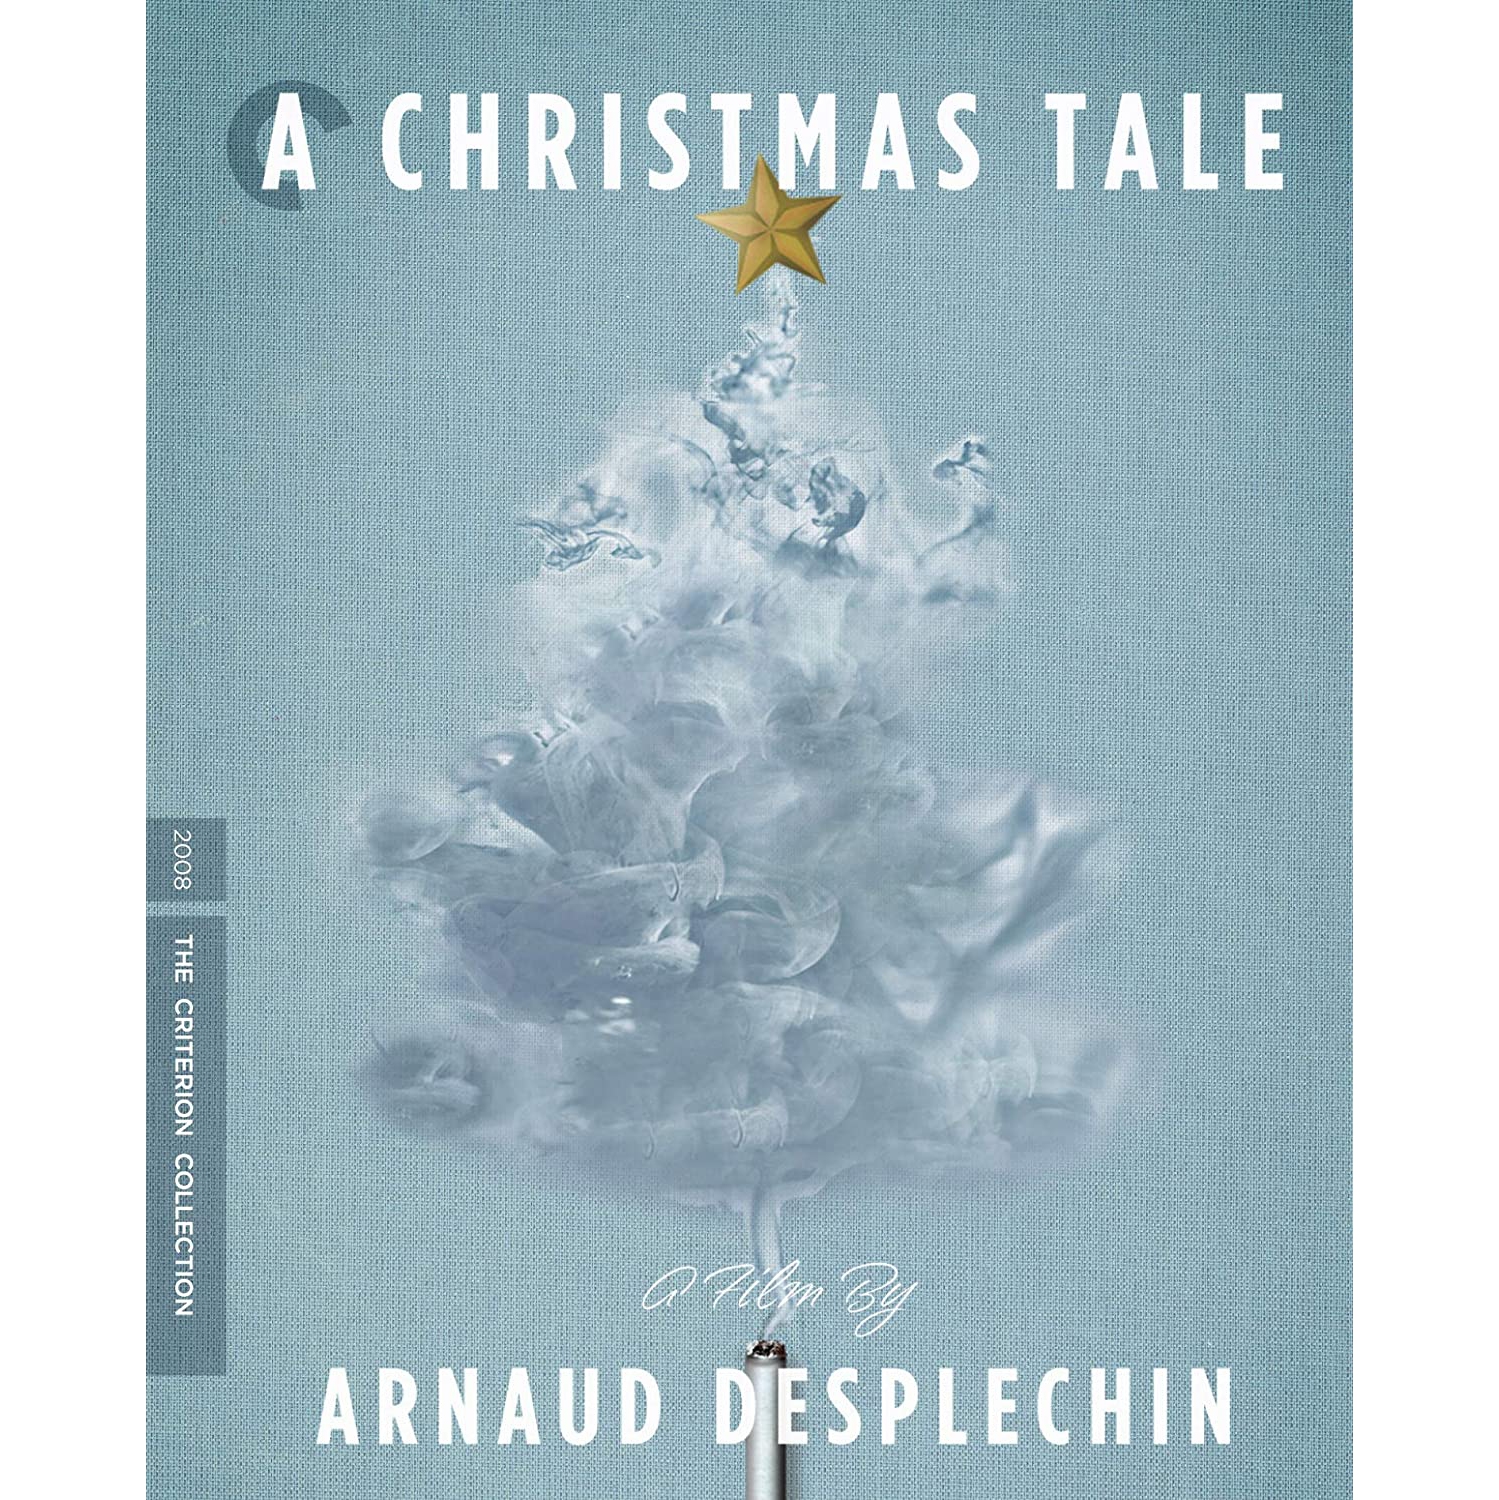 A Christmas Tale (Criterion Collection) [Blu-ray]